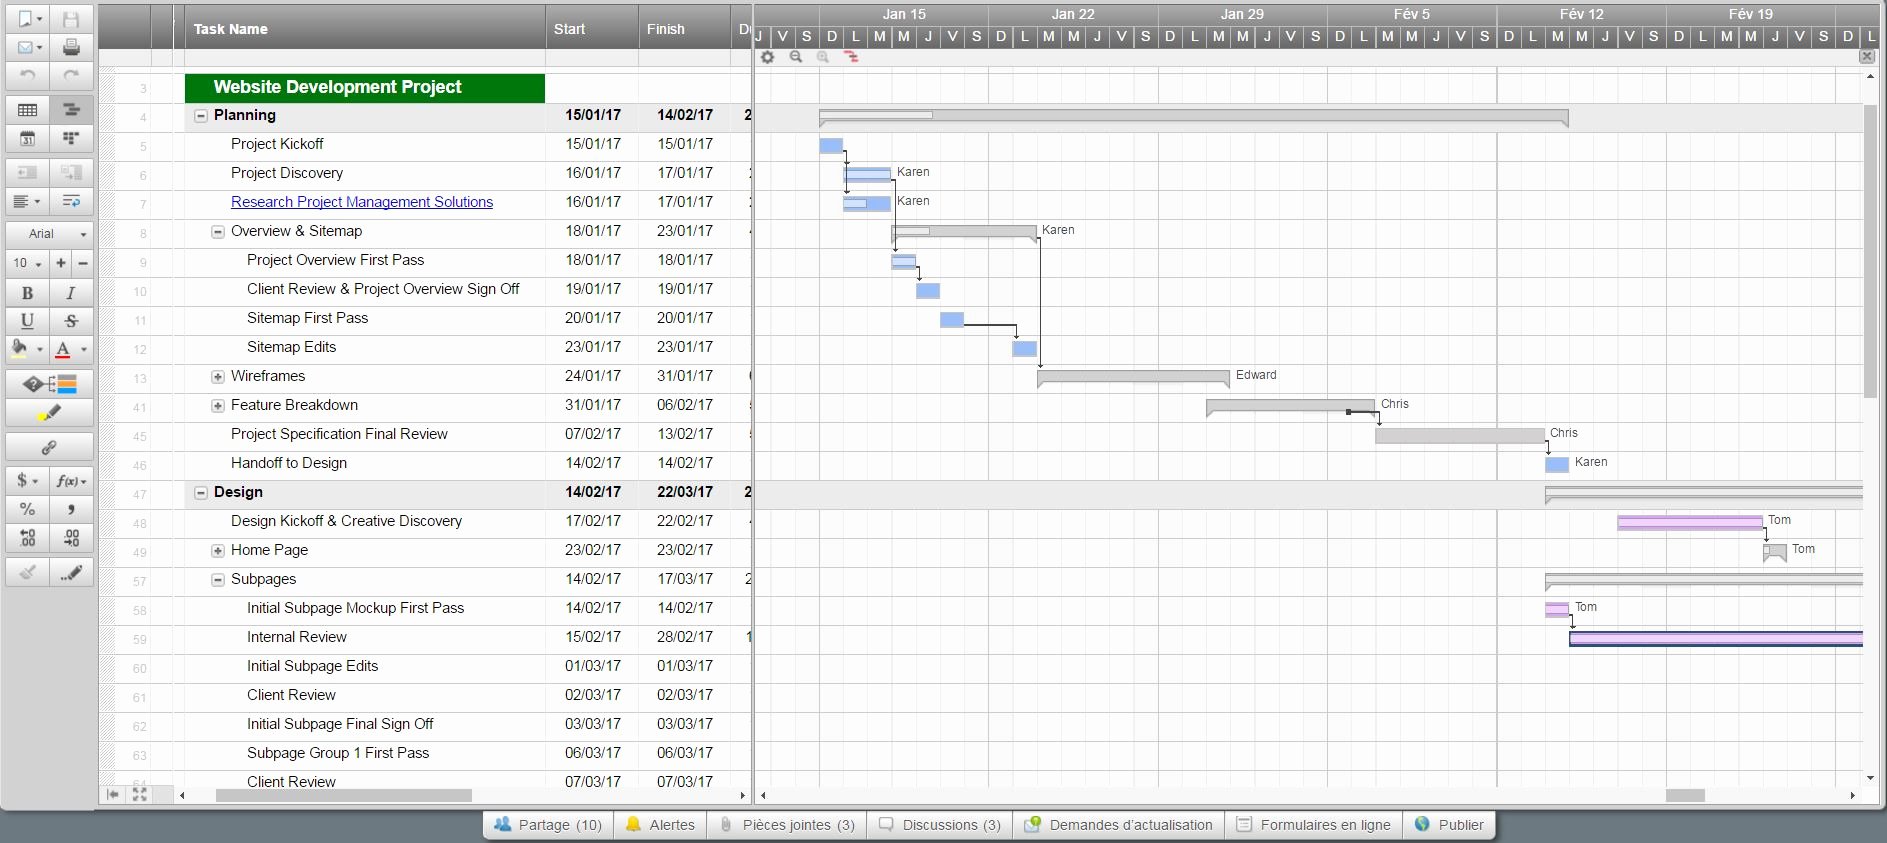 Marketing Timeline Template Excel New Free Marketing Timeline Tips and Templates Smartsheet